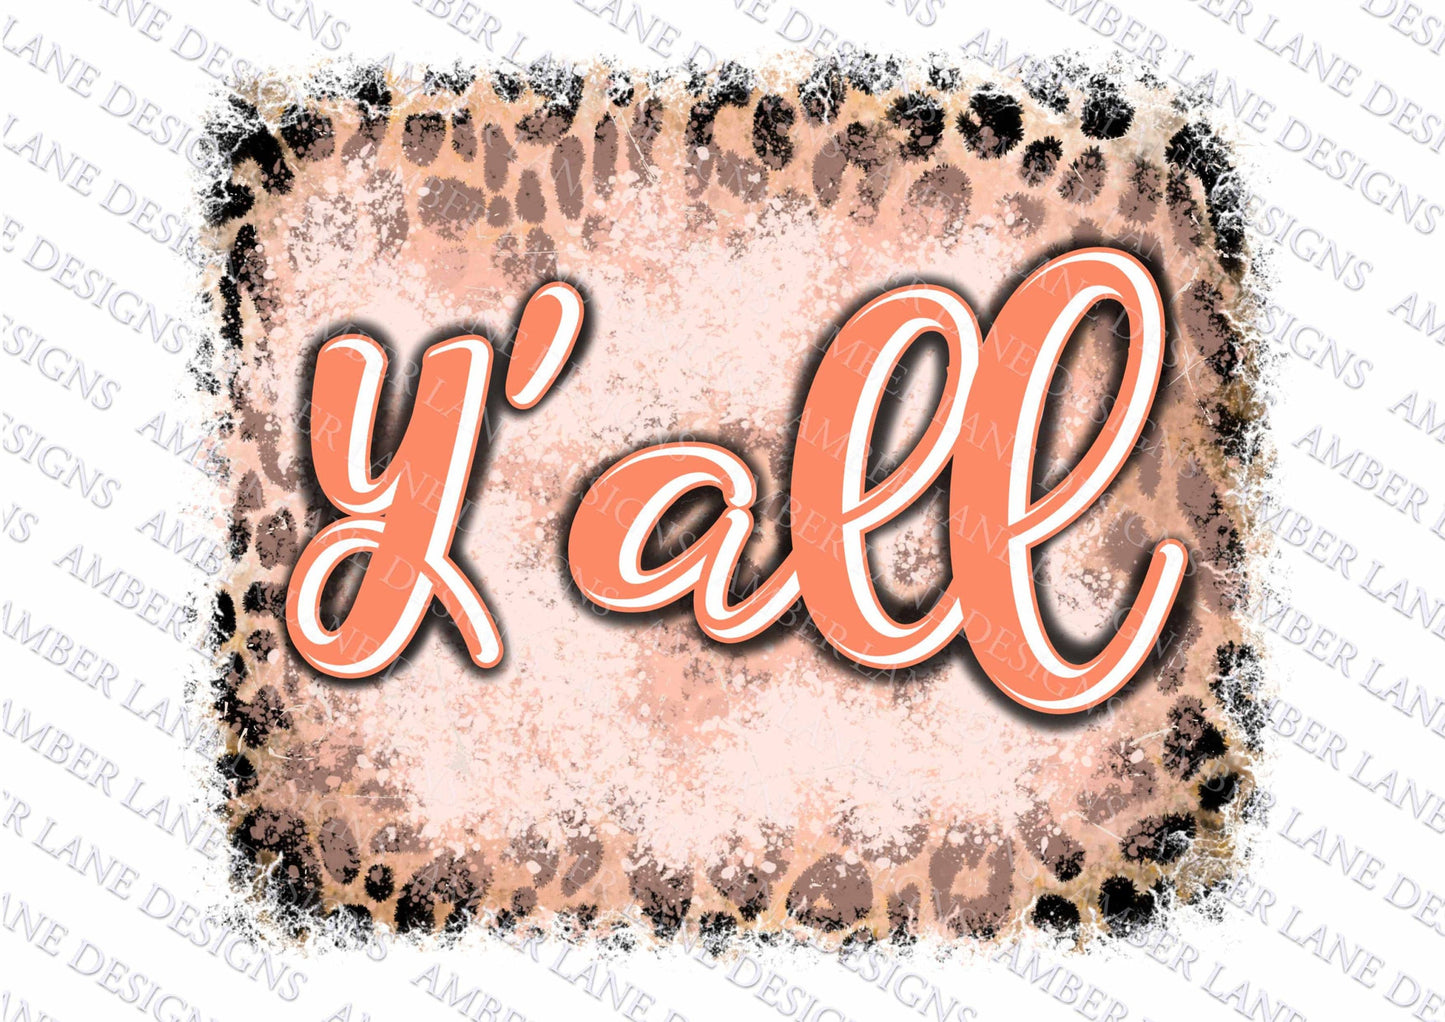 Y'all png , leopard, distressed frame, png file